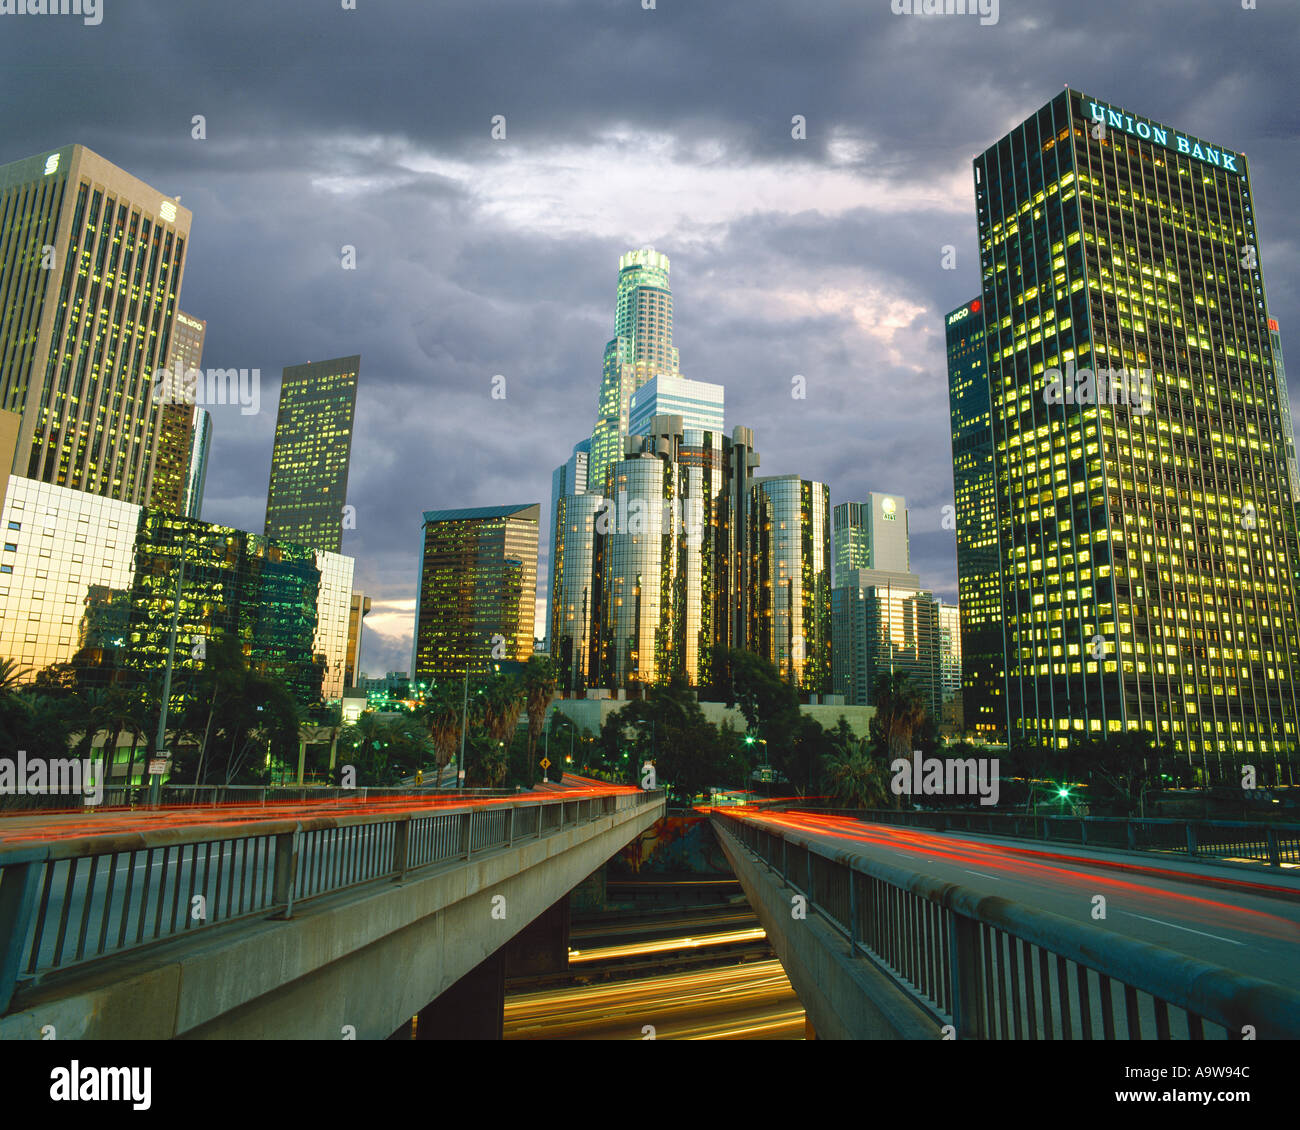 Downtown Los Angeles, California and the Harbor Freeway Stock Photo